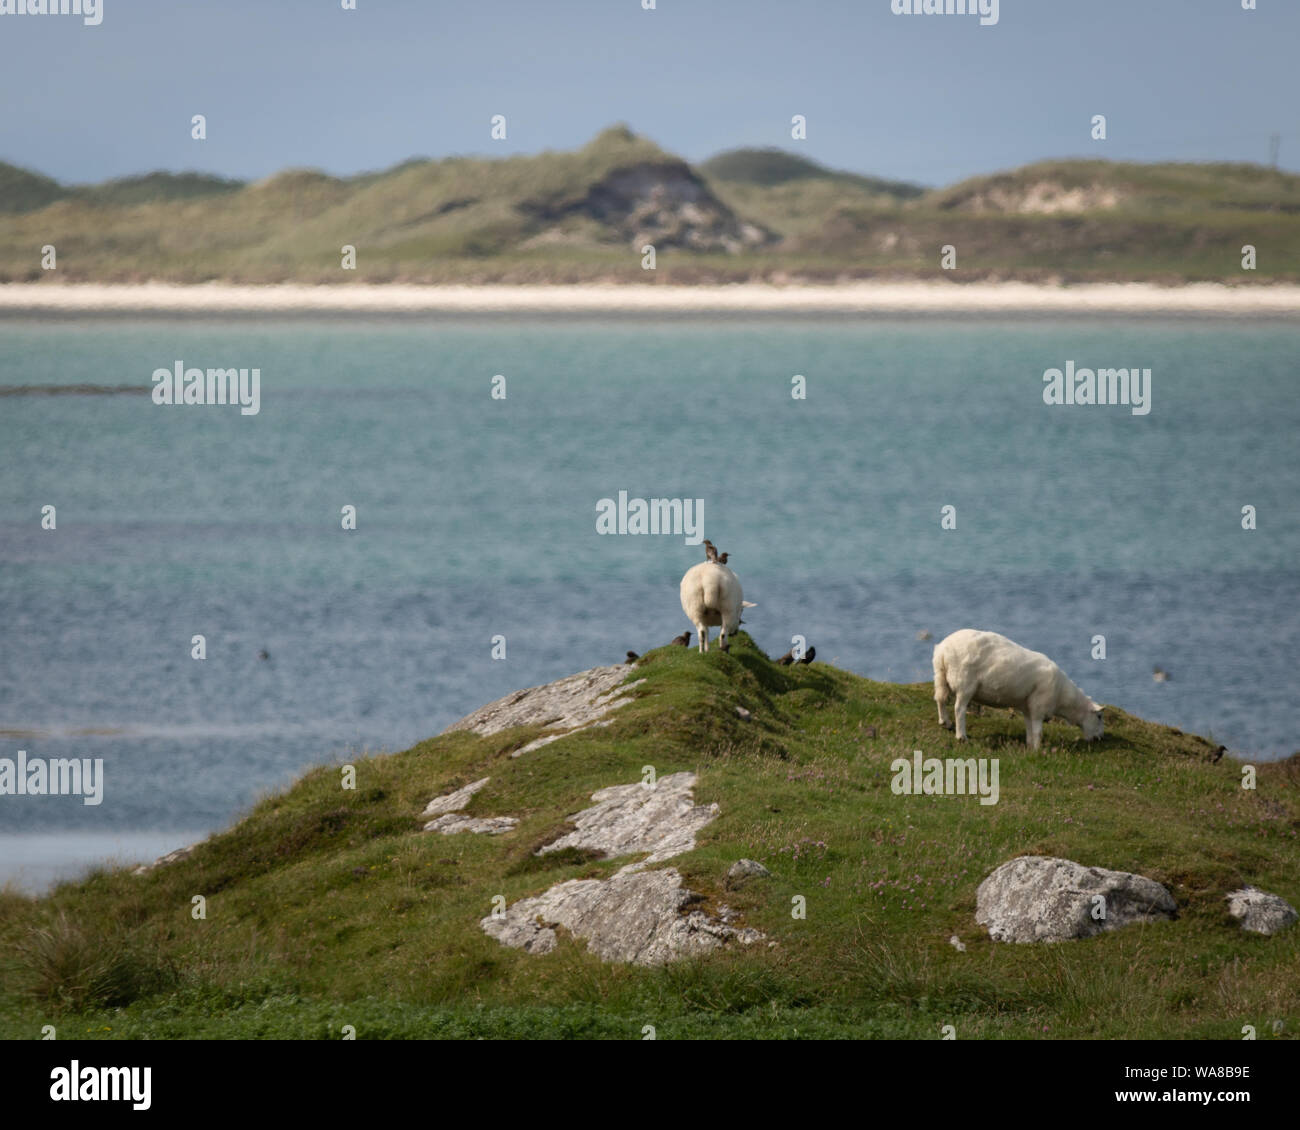 A few sheep in a stunning location. Outer Hebrides, Scotland. Stock Photo